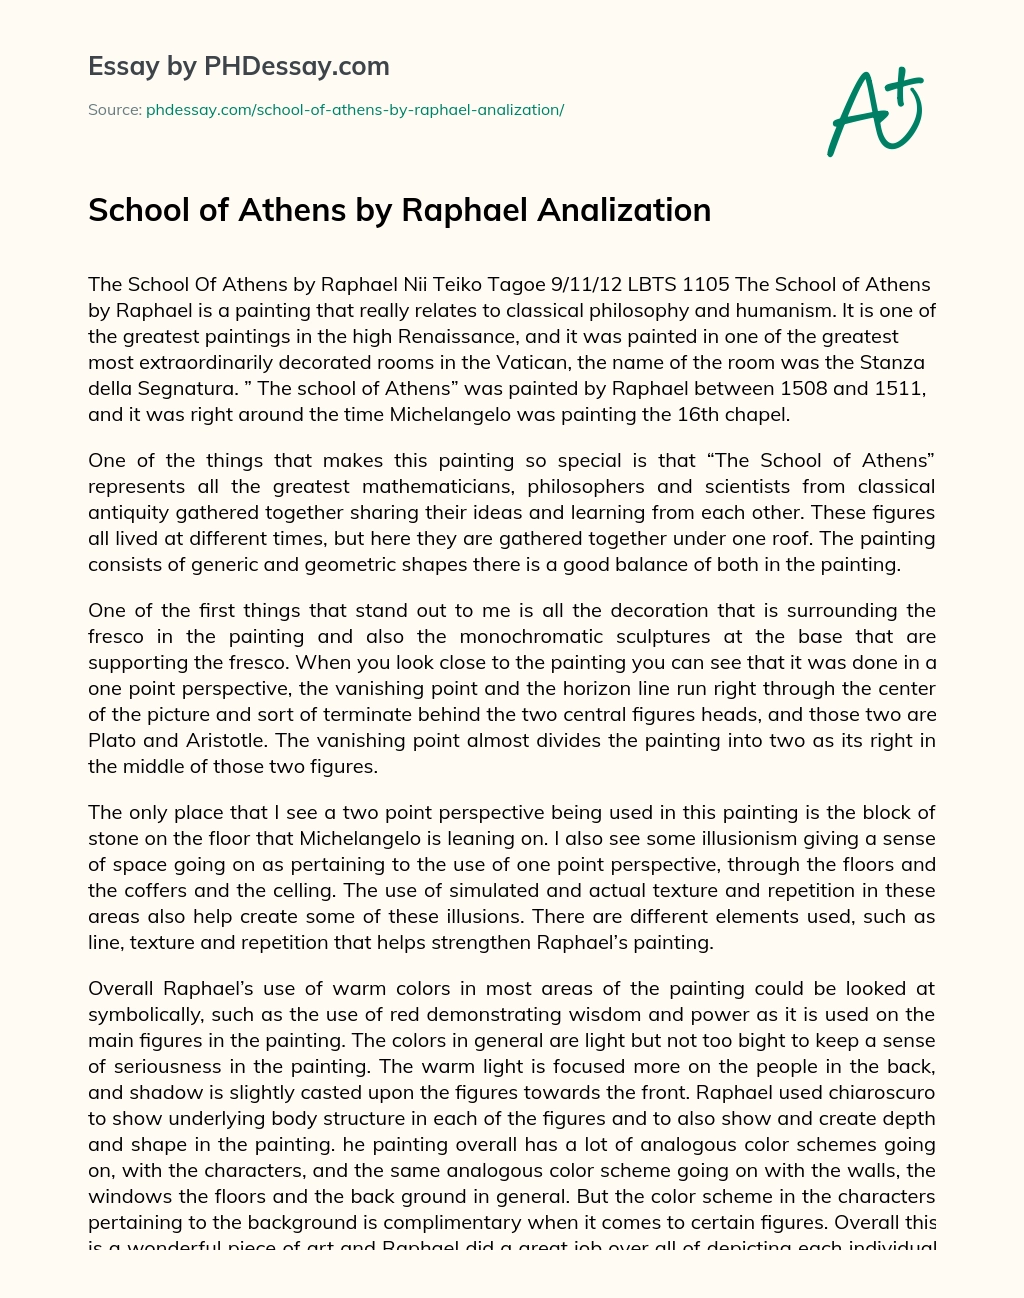 School of Athens by Raphael Analization essay